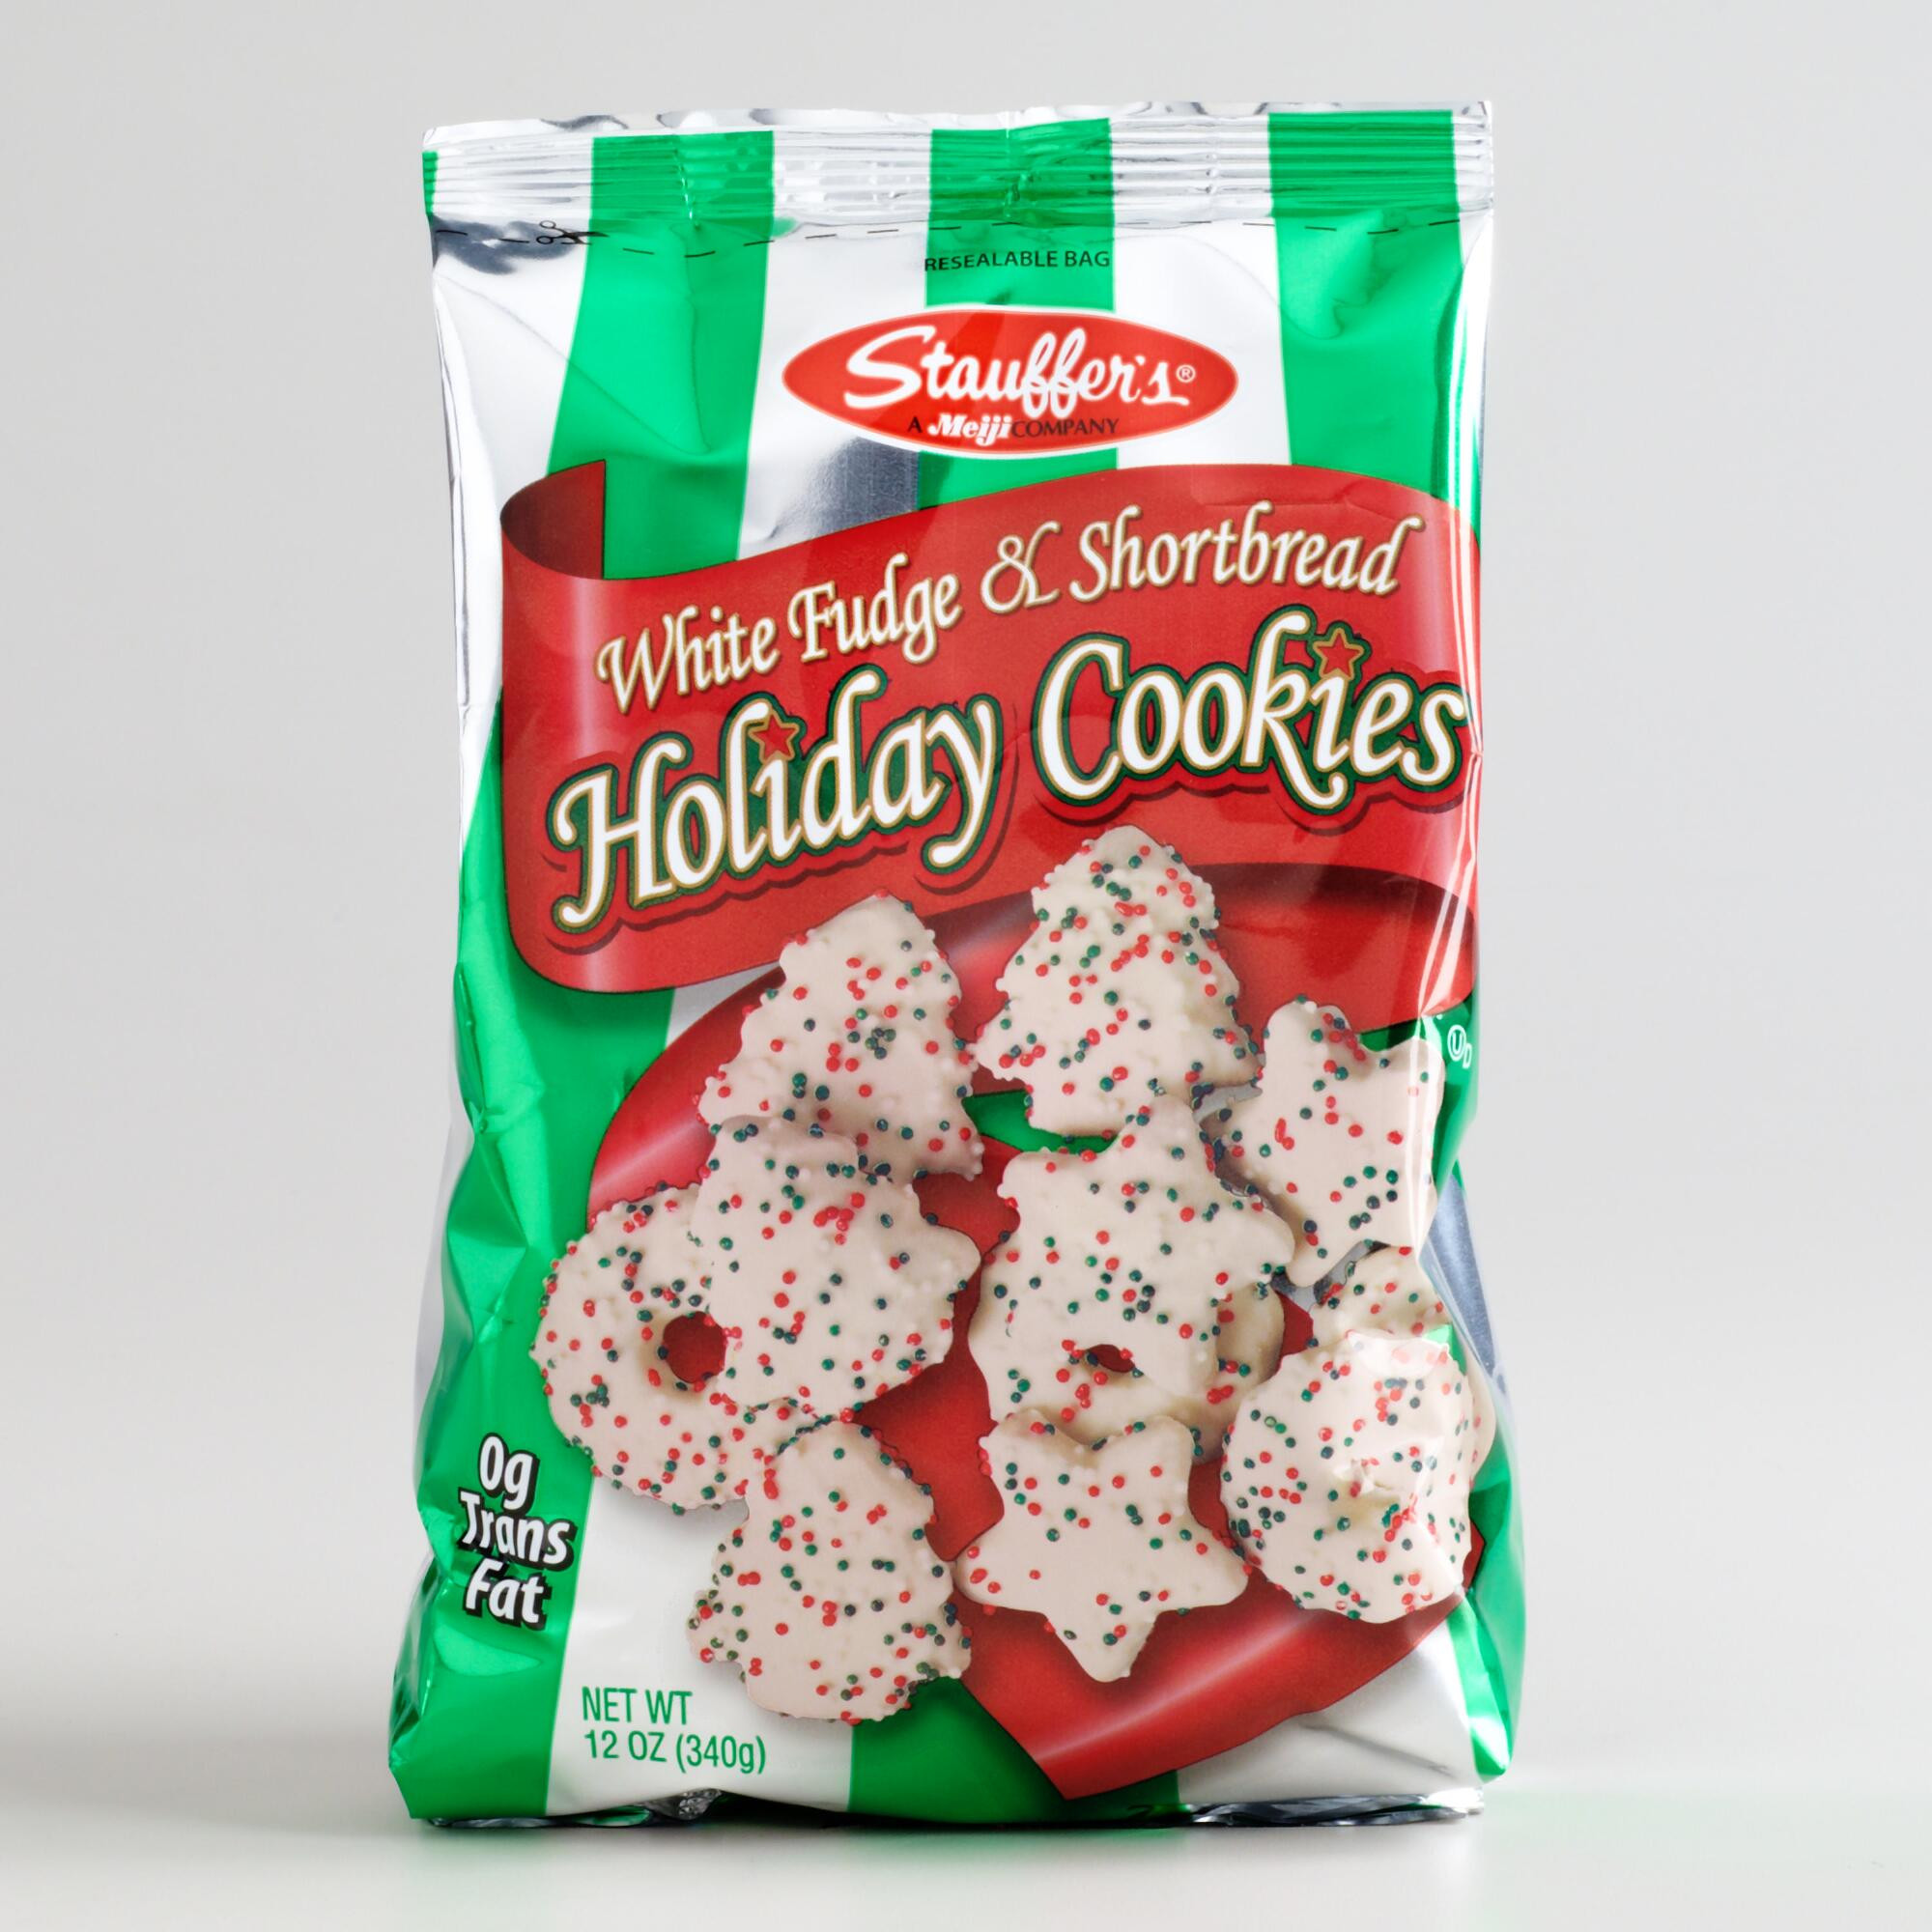 Stauffer Christmas Cookies
 Stauffer s White Fudge and Shortbread Holiday Cookies